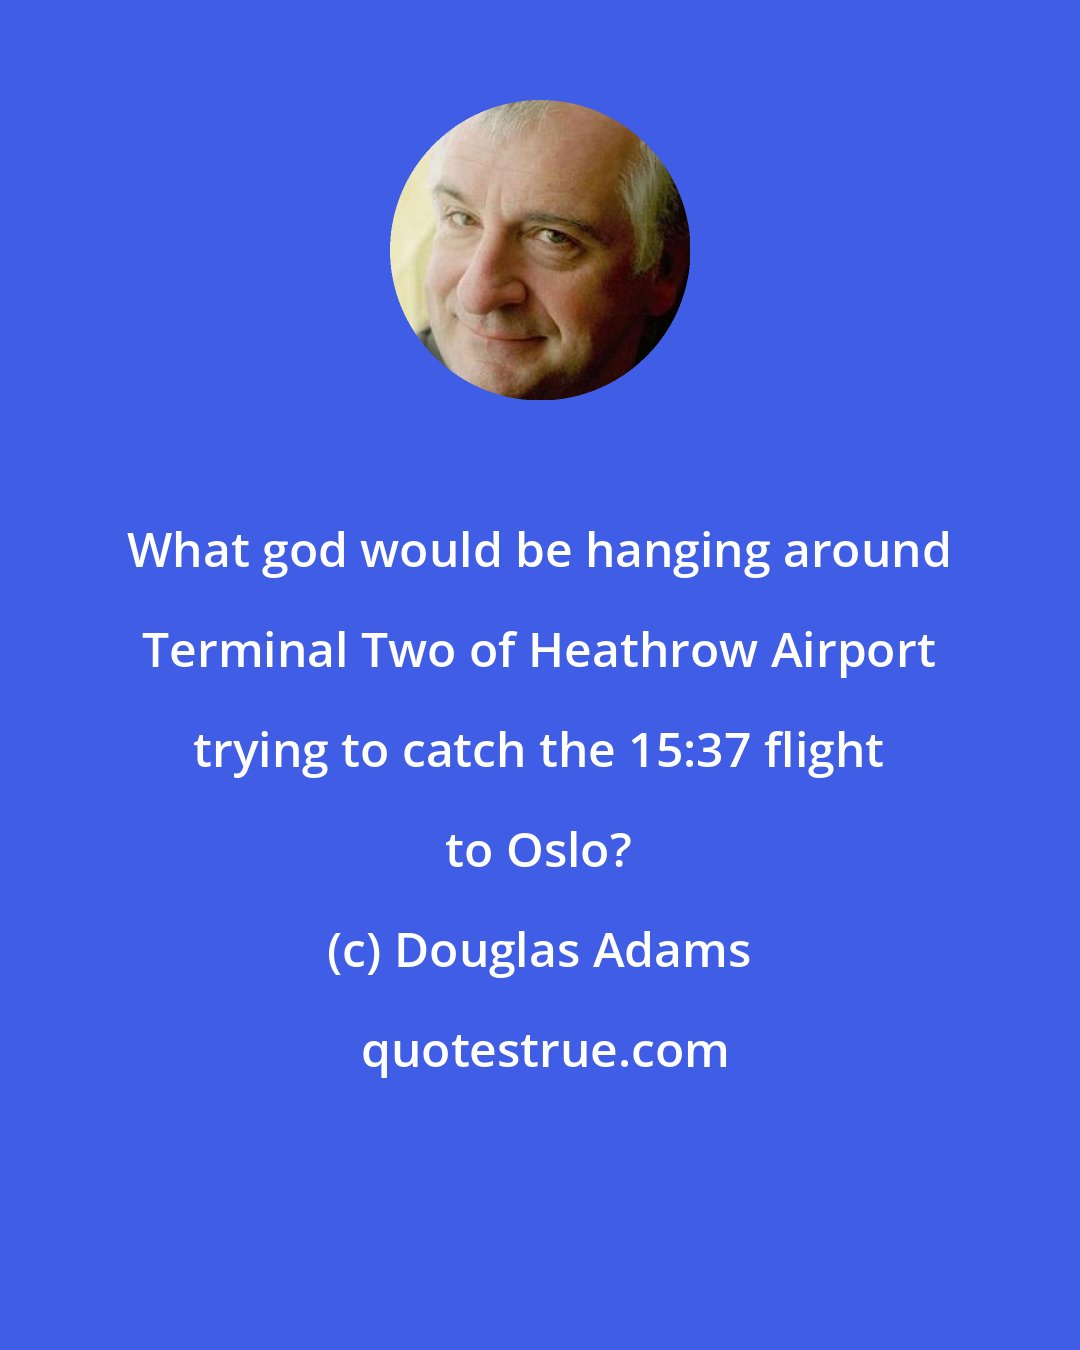 Douglas Adams: What god would be hanging around Terminal Two of Heathrow Airport trying to catch the 15:37 flight to Oslo?